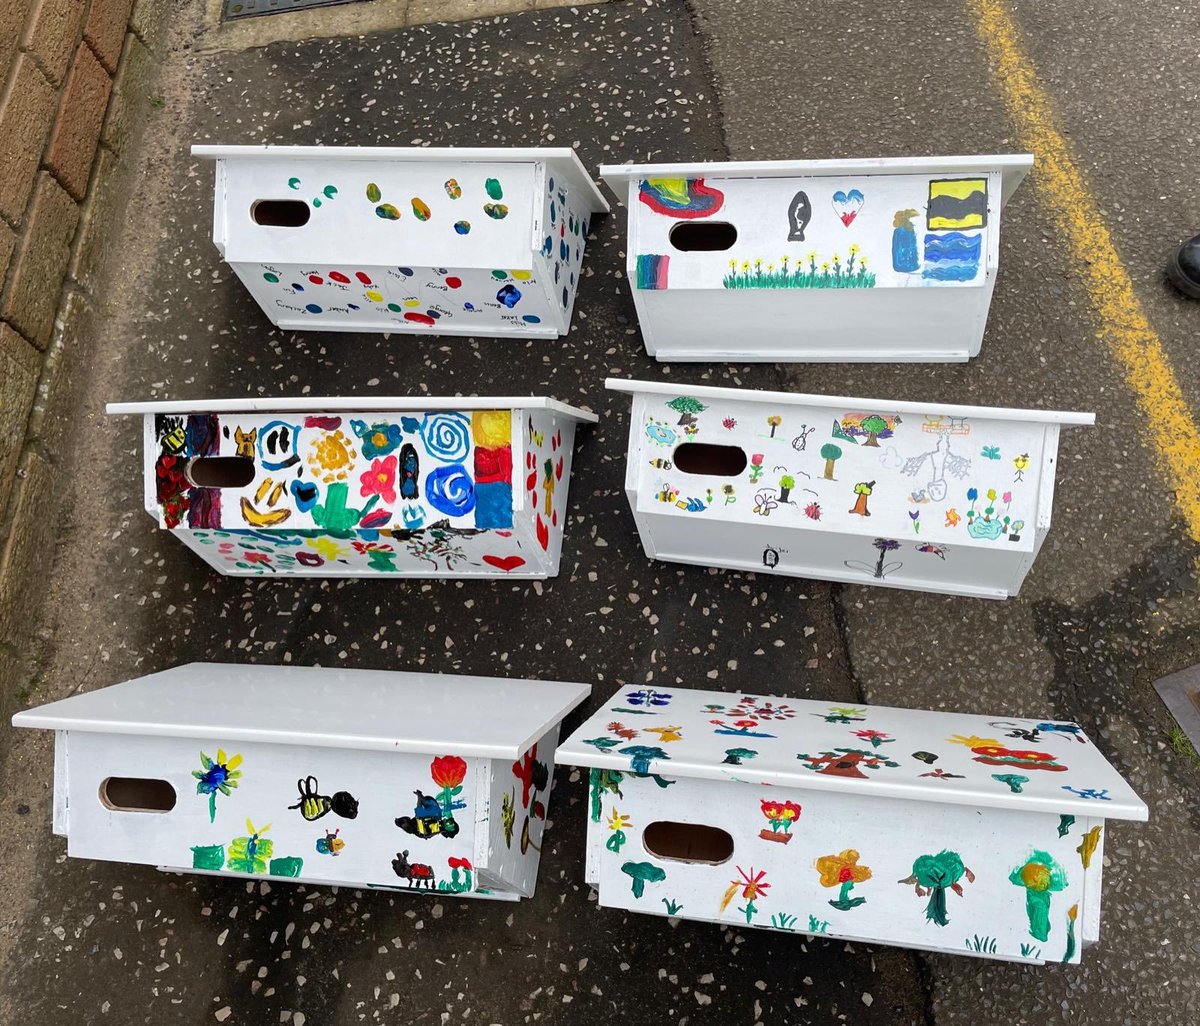 The pupils of Kelsale Primary School have decorated their Swift nest boxes, how do they look? The SOSSwifts’ Community Set will be installed along with a 240V @PeakBoxes call system ready for the Swifts’ arrival. @SuffolkBirdGrp @suffolkwildlife